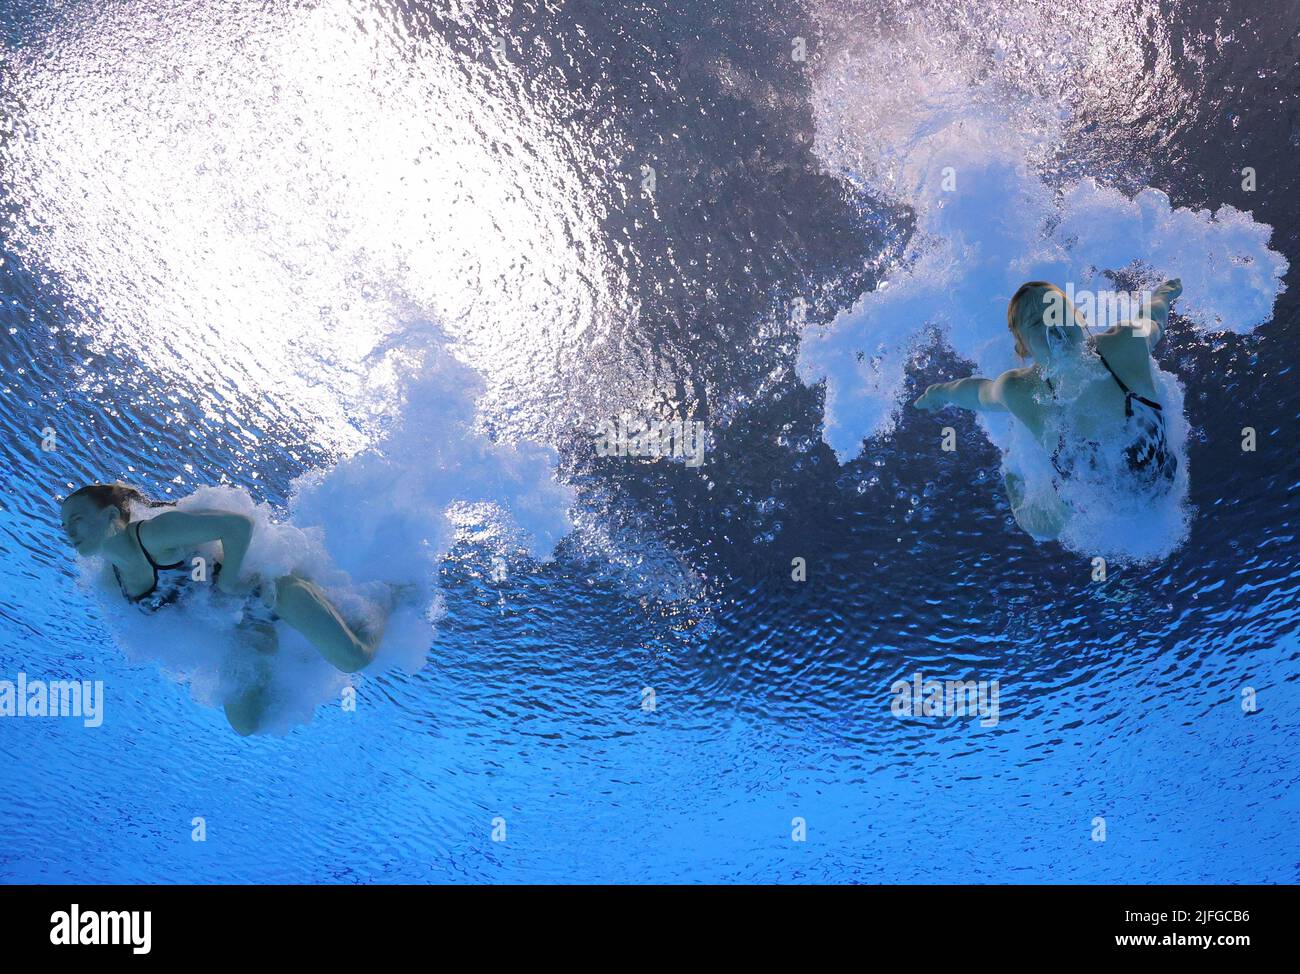 Diving - FINA World Championships - Duna Arena, Budapest, Hungary - July 3, 2022 Germany's Lena Hentschel and Tina Punzel in action during the women's 3m synchronized preliminary REUTERS/Antonio Bronic Stock Photo